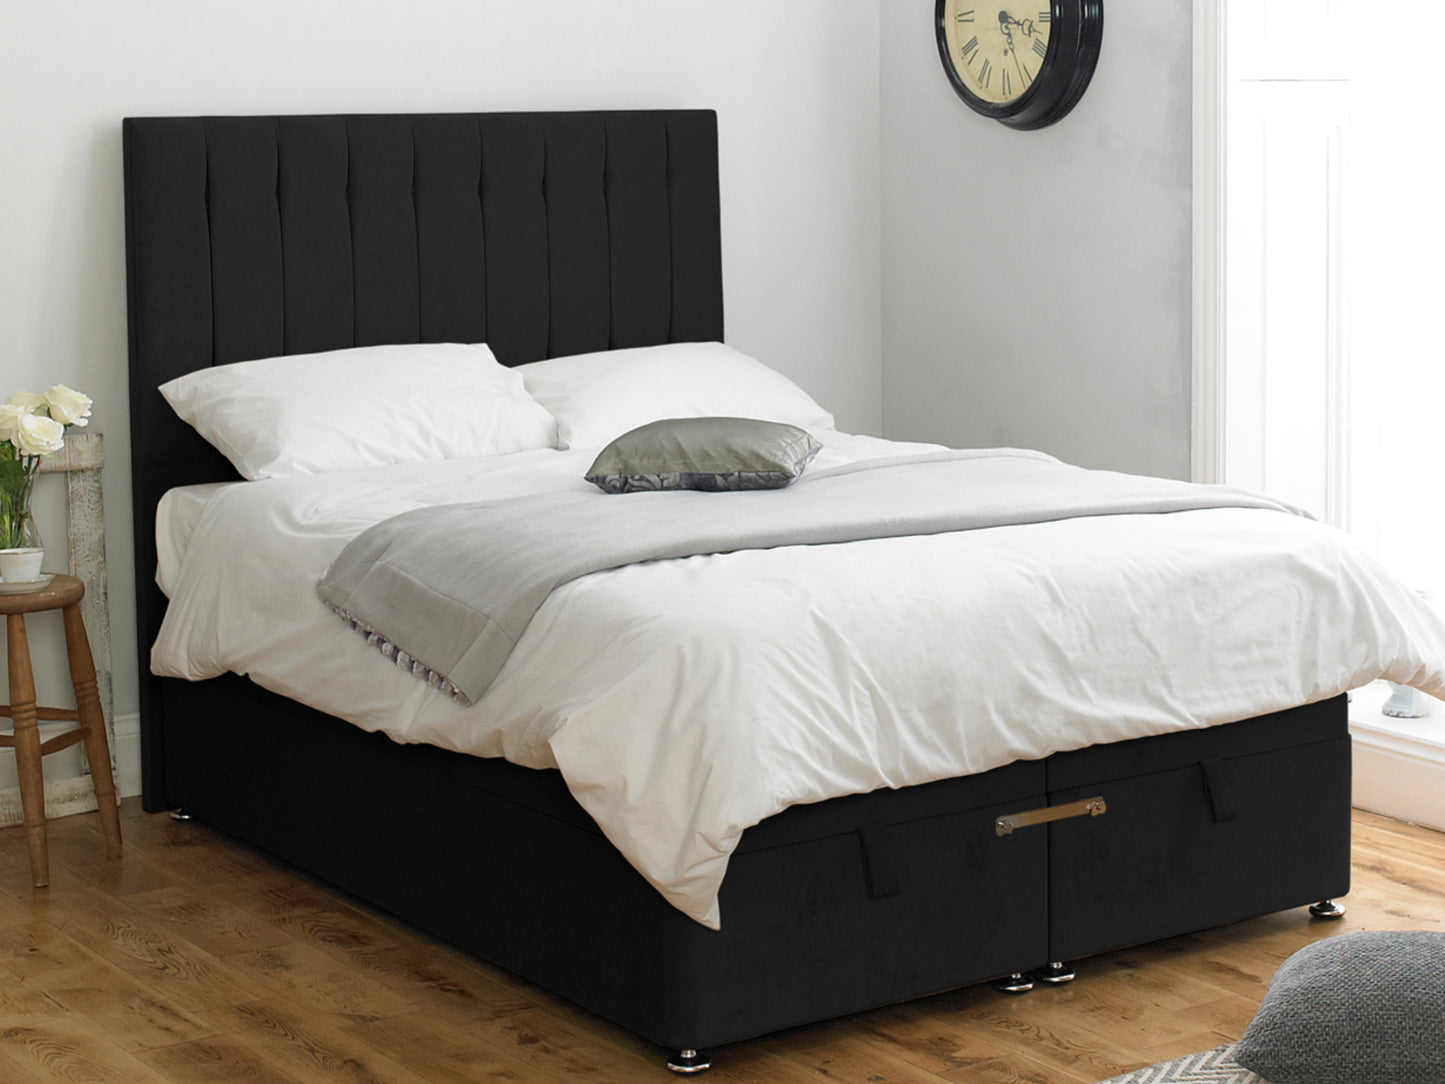 Shelly FS Ottoman Twix Opening Bed Base in Naples Black